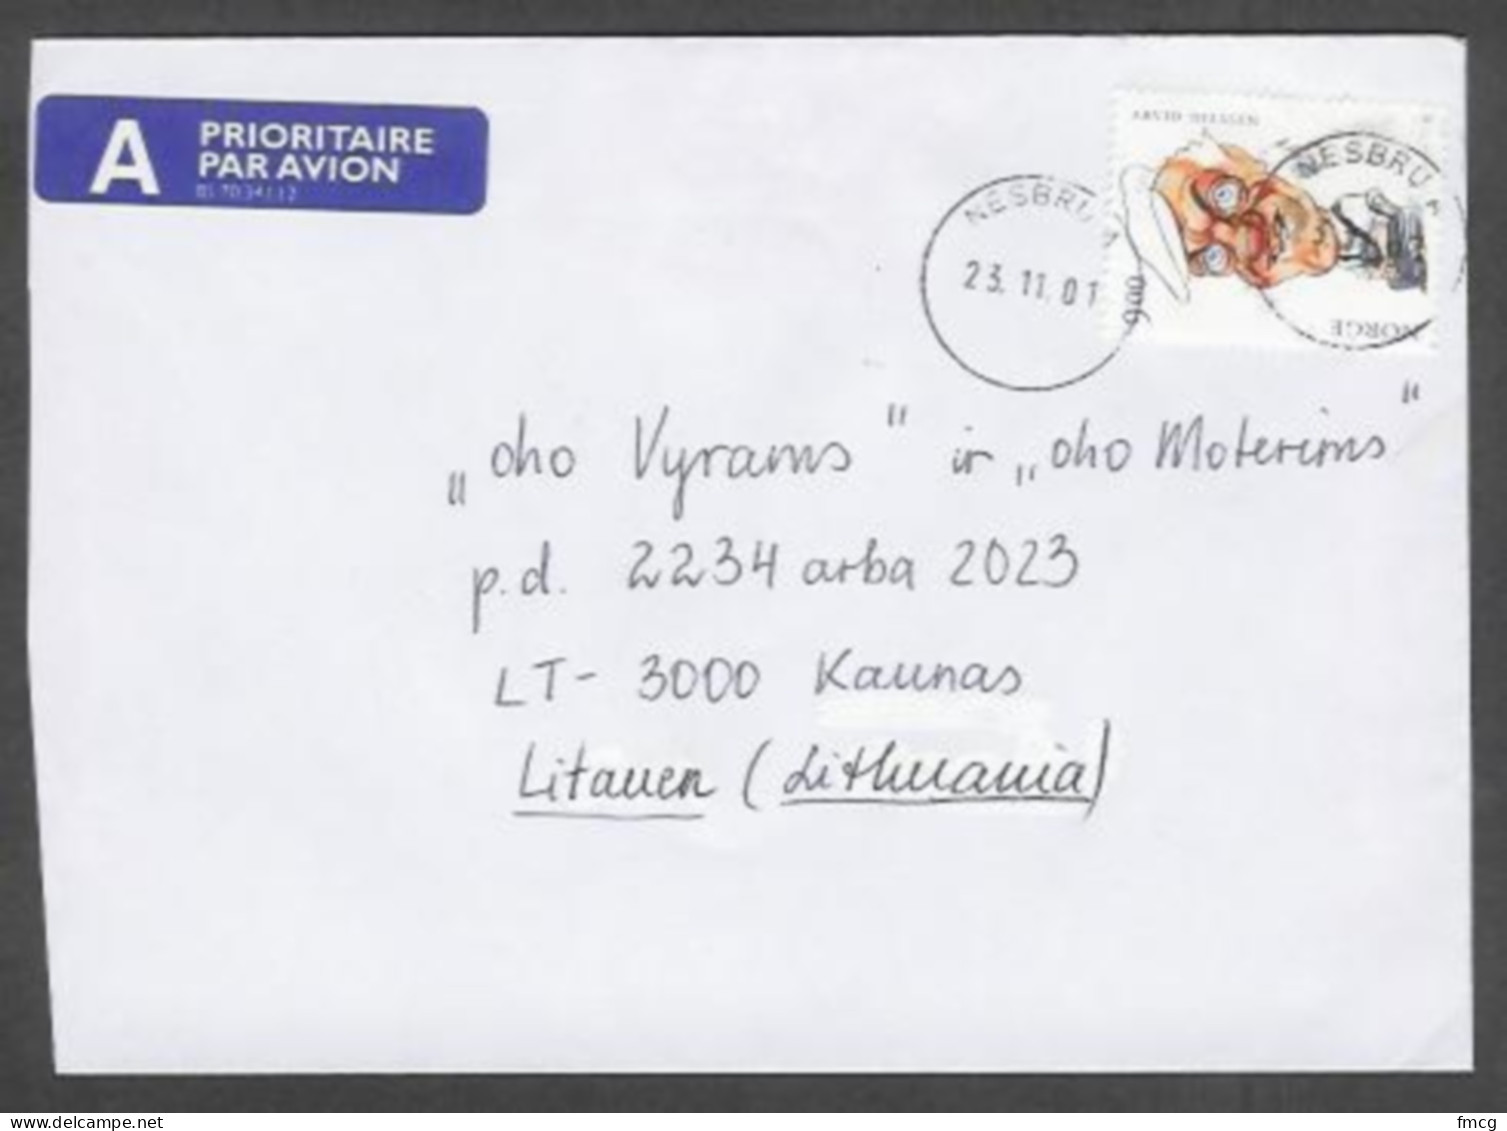 2001 9.00 Arvid Nilssen, Nesbrua (23.11.01) To Lithuania - Covers & Documents